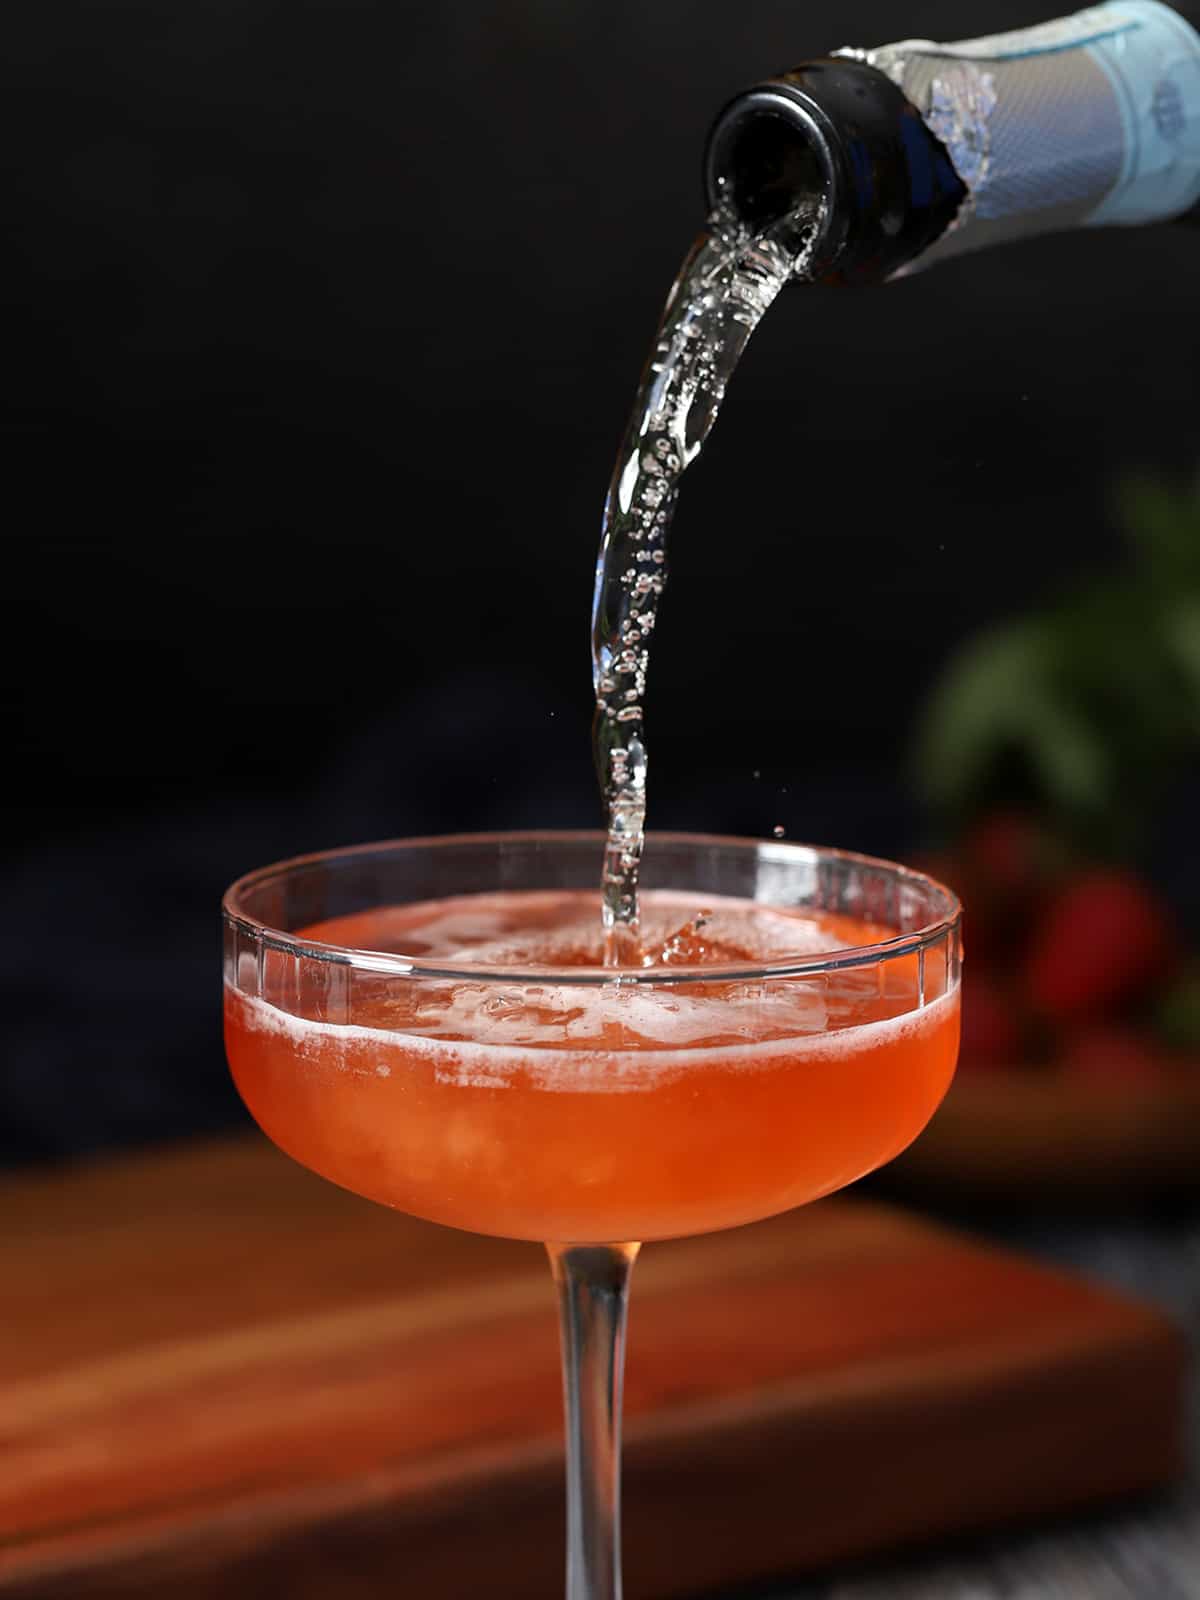 Prosecco being poured into a coupe glass of strawberry basil cocktail.